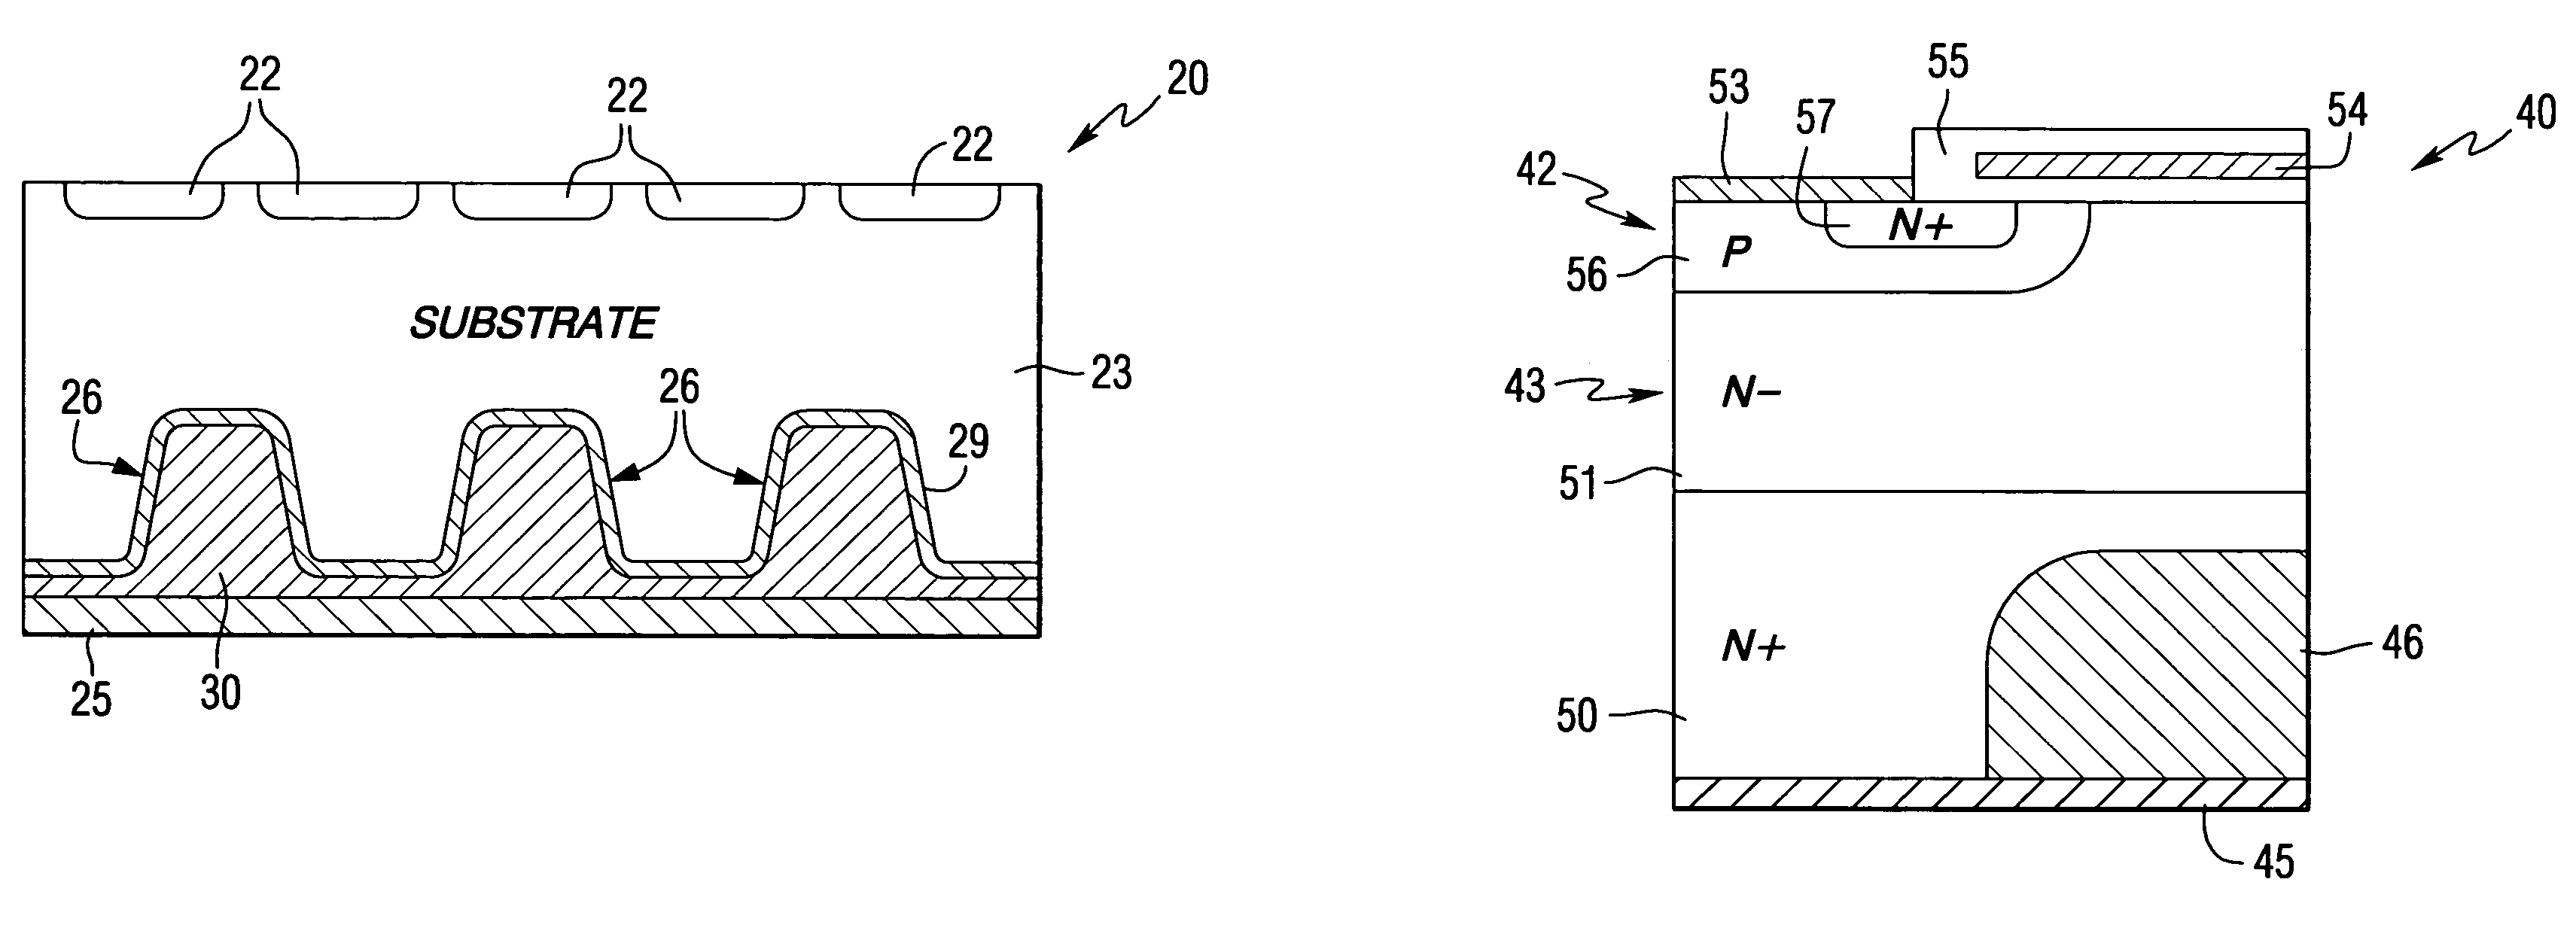 Semiconductor device having reduced effective substrate resistivity and associated methods